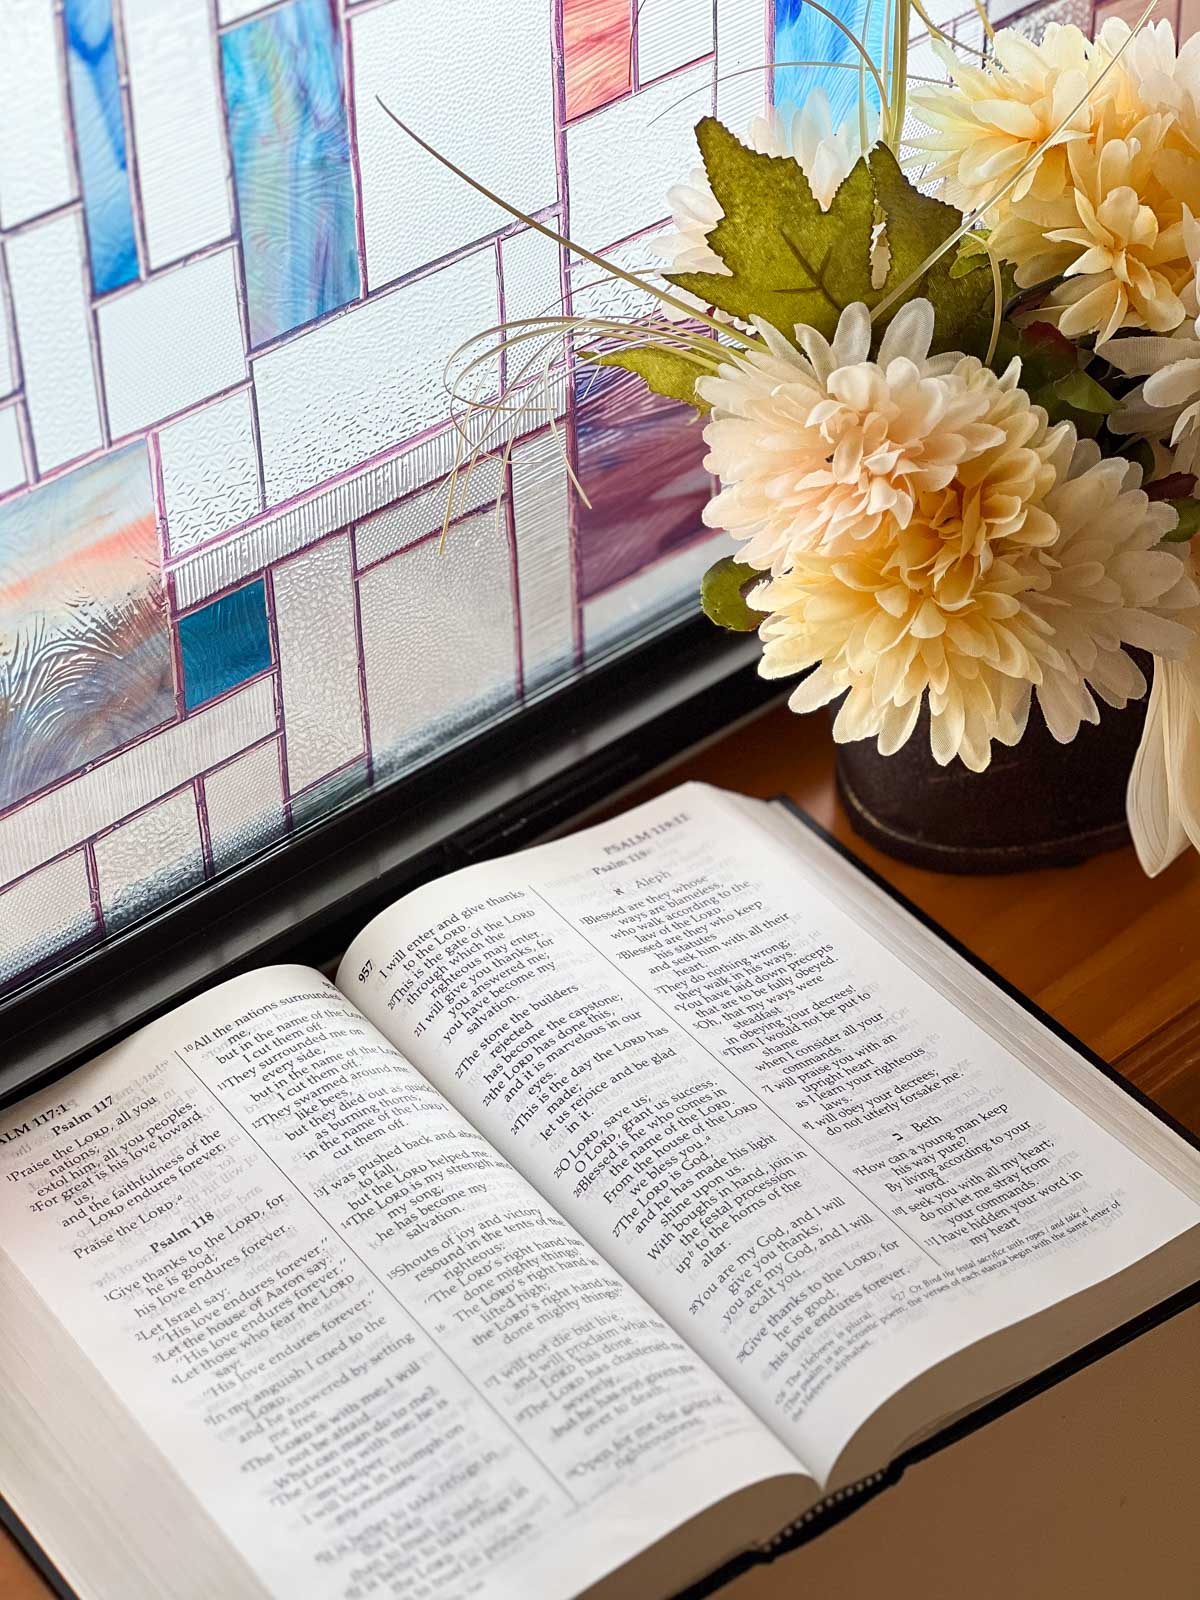 open Bible on a windowsill with a stained glass window and flower arrangement.